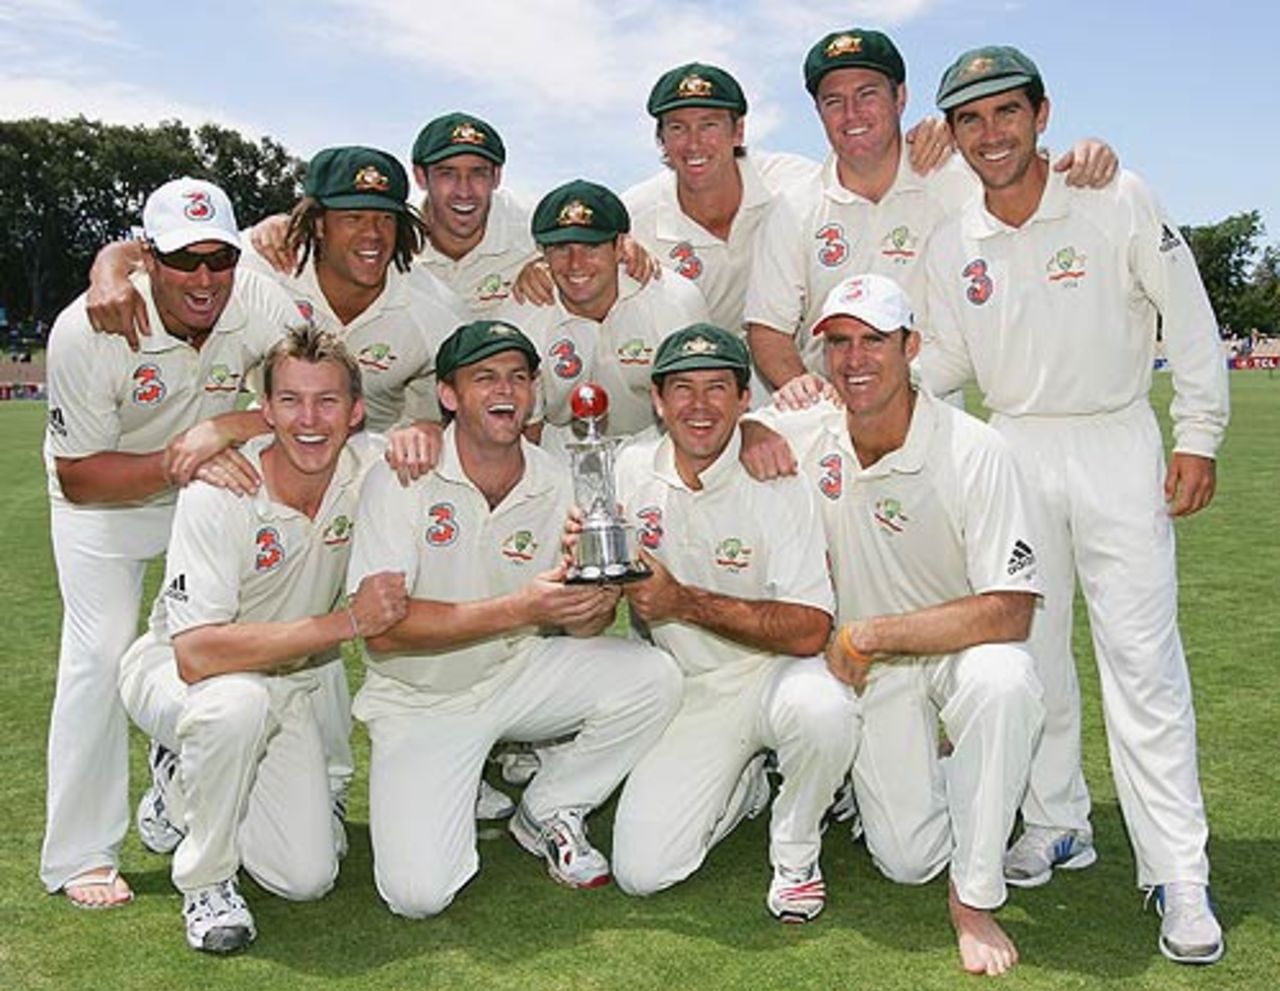 The victorious Australian team with the Sir Frank Worrel Trophy, 3rd Test, Adelaide, 5th day, November 29, 2005